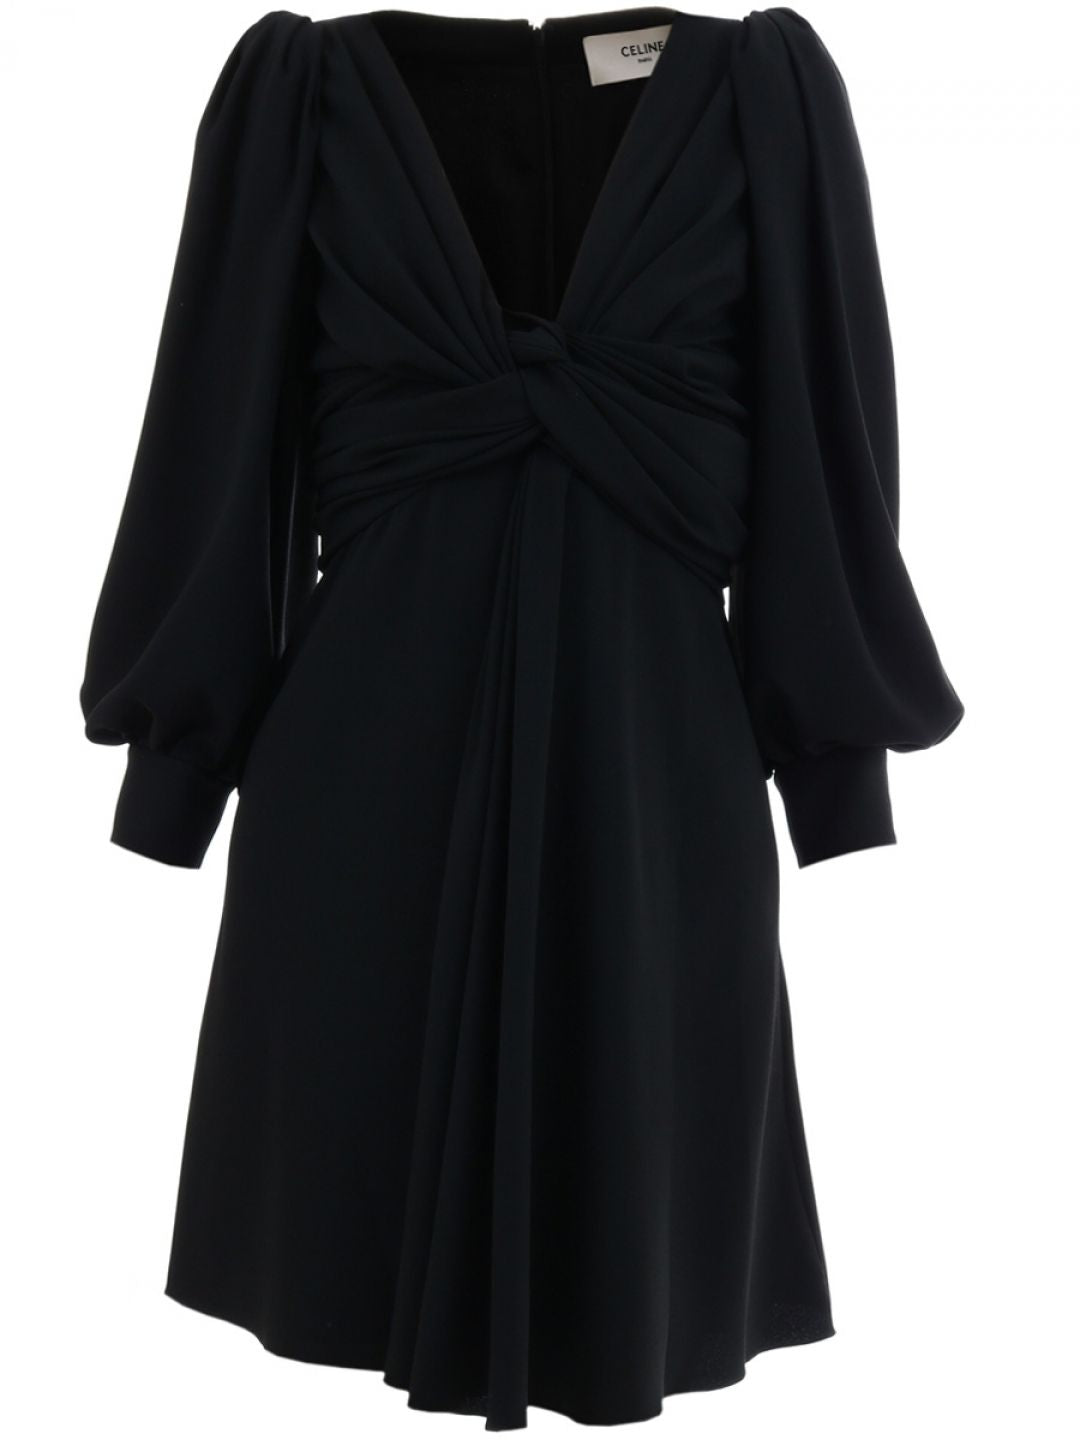 CELINE Black V-Neck Wrap Dress for Women - Stylish Draping and Long Sleeves for SS19